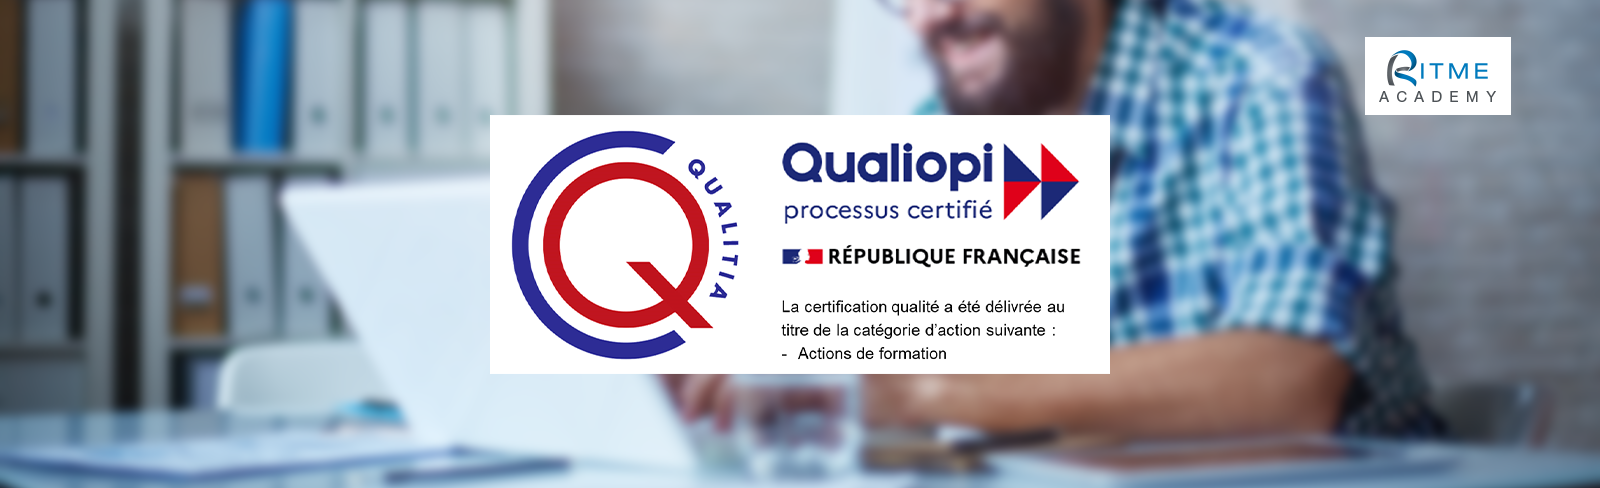 RITME is now QUALIOPI certified!